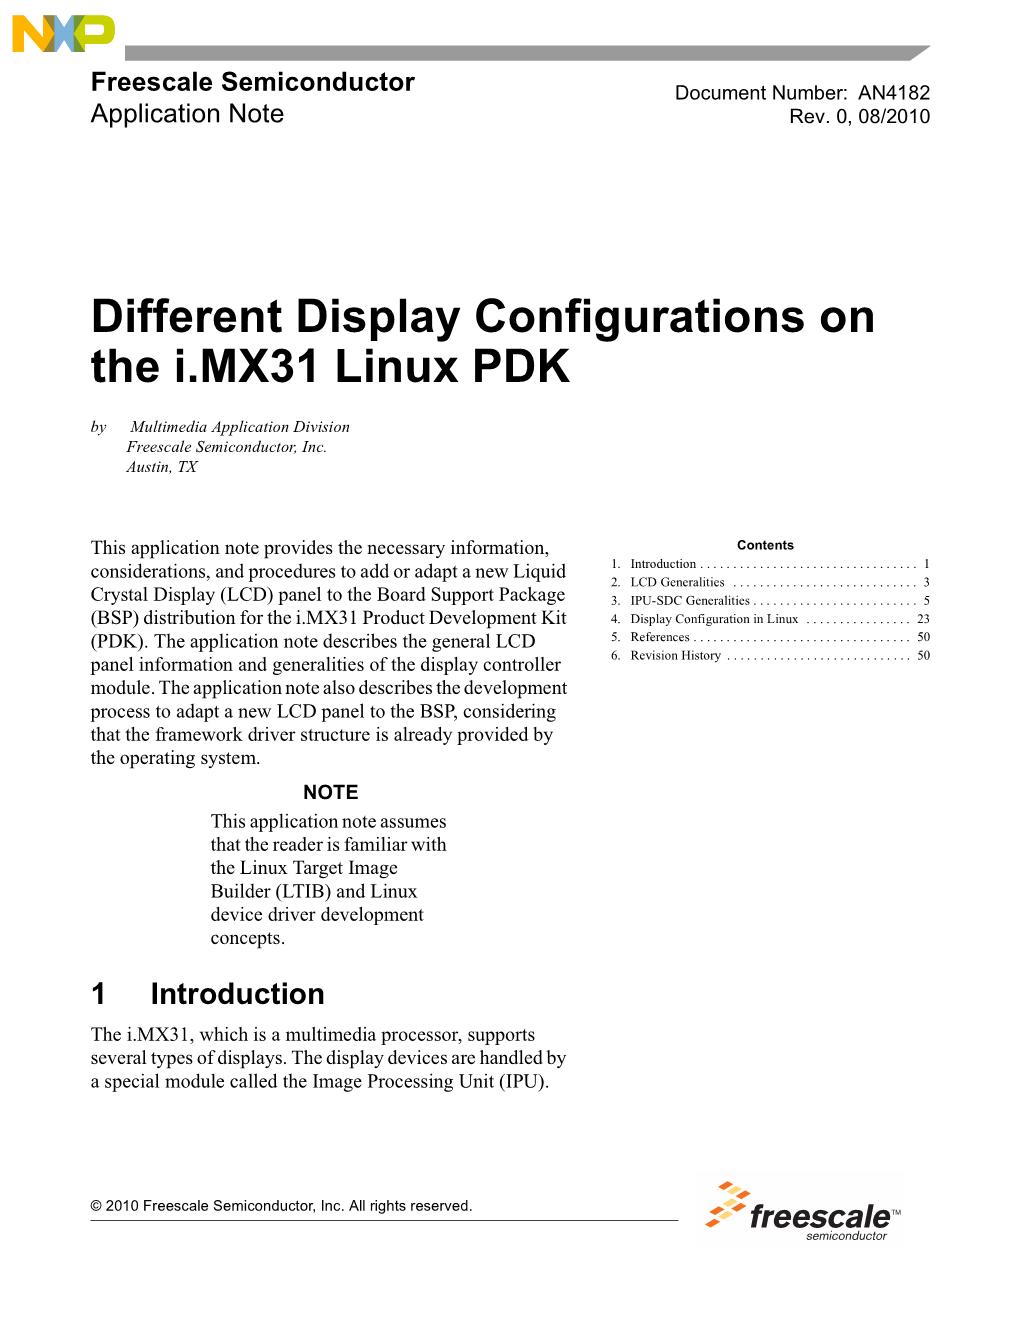 Different Display Configurations on the I.MX31 Linux PDK by Multimedia Application Division Freescale Semiconductor, Inc